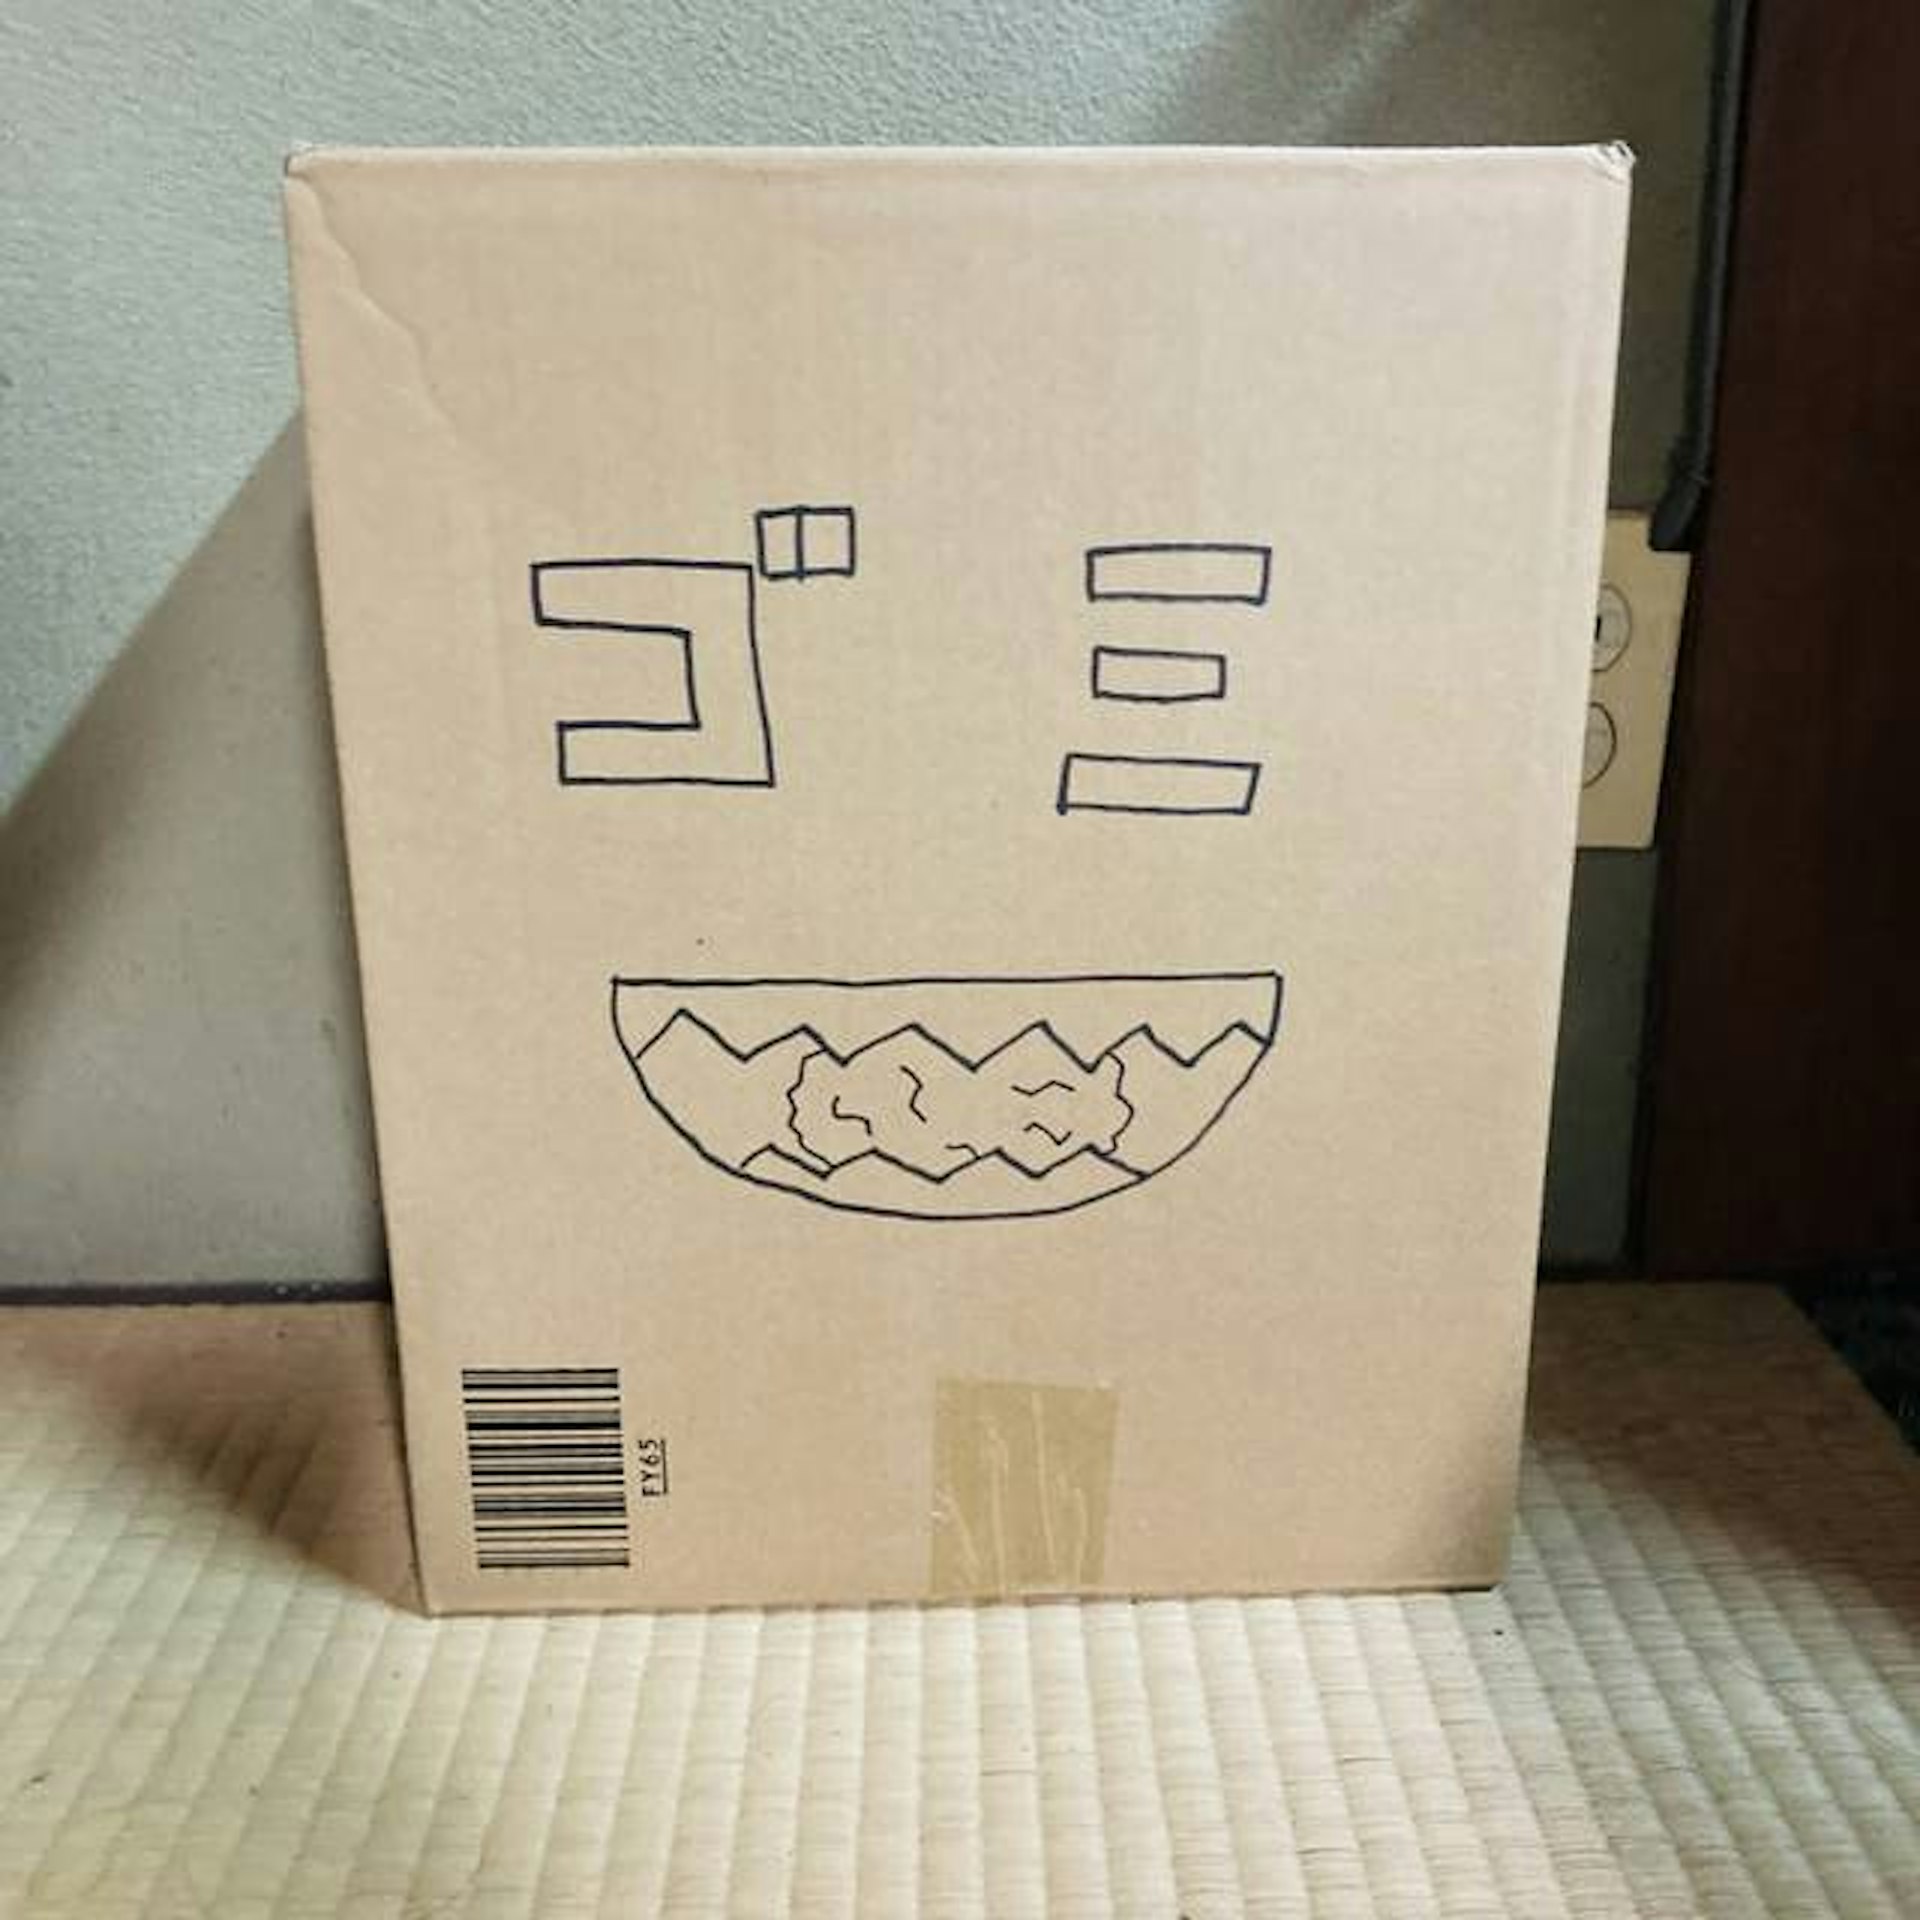 Let’s make a “Trash Can Man” out of cardboard!